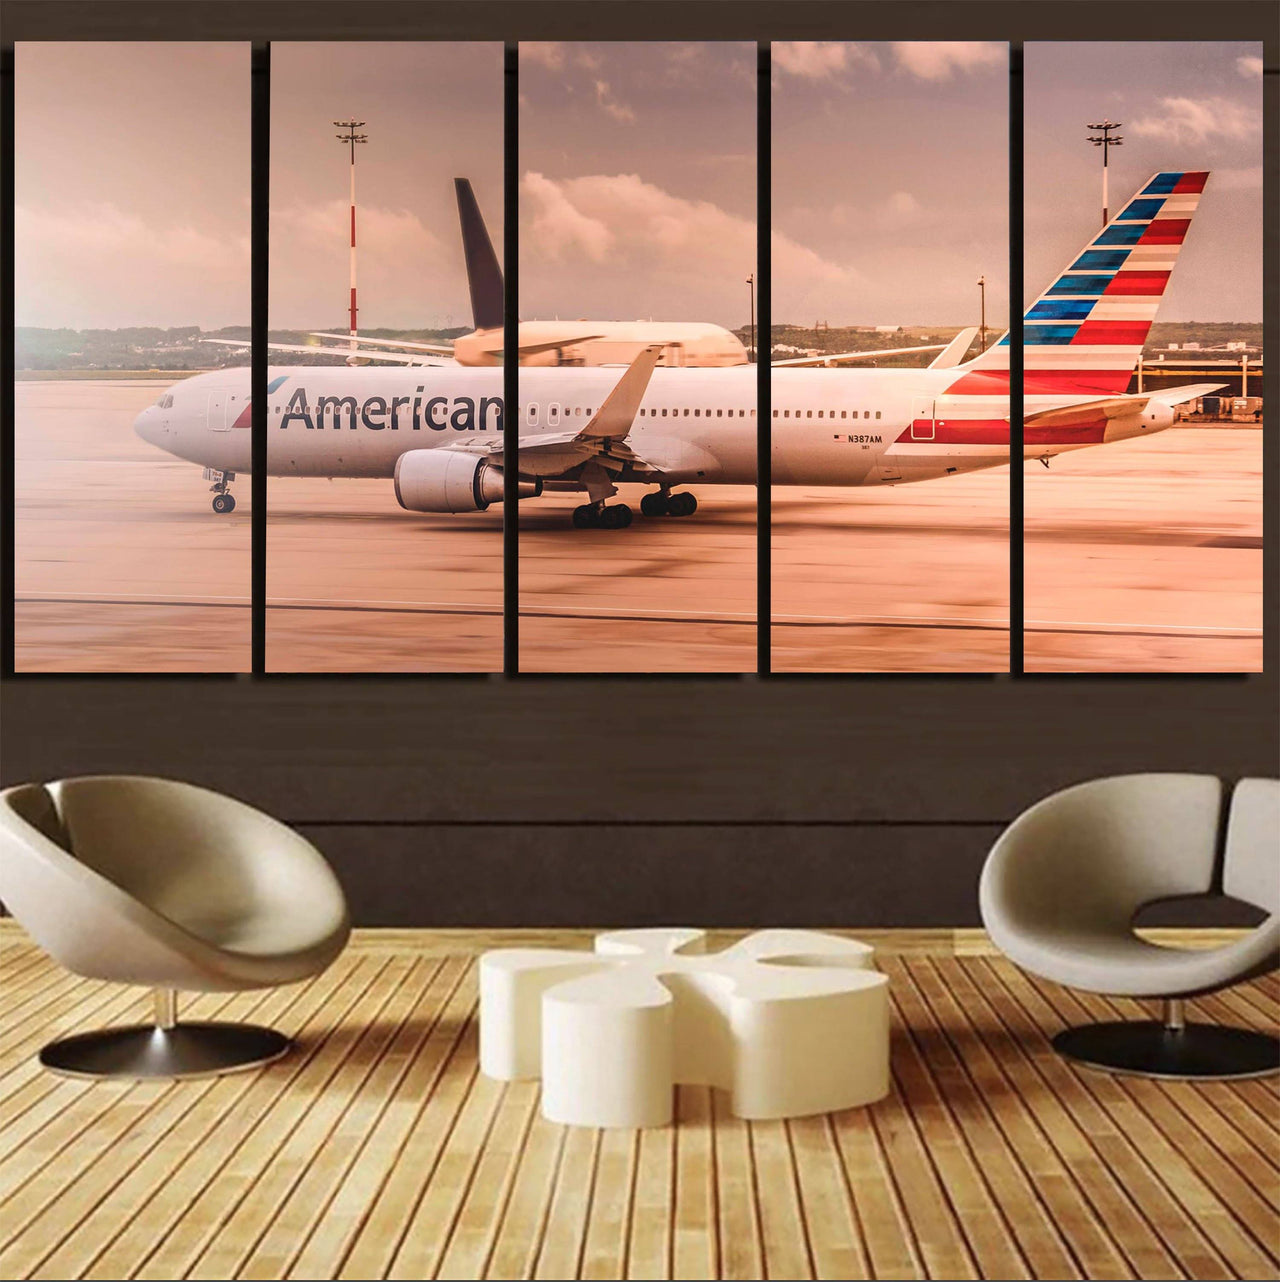 American Airlines Boeing 767 Printed Canvas Prints (5 Pieces) Aviation Shop 